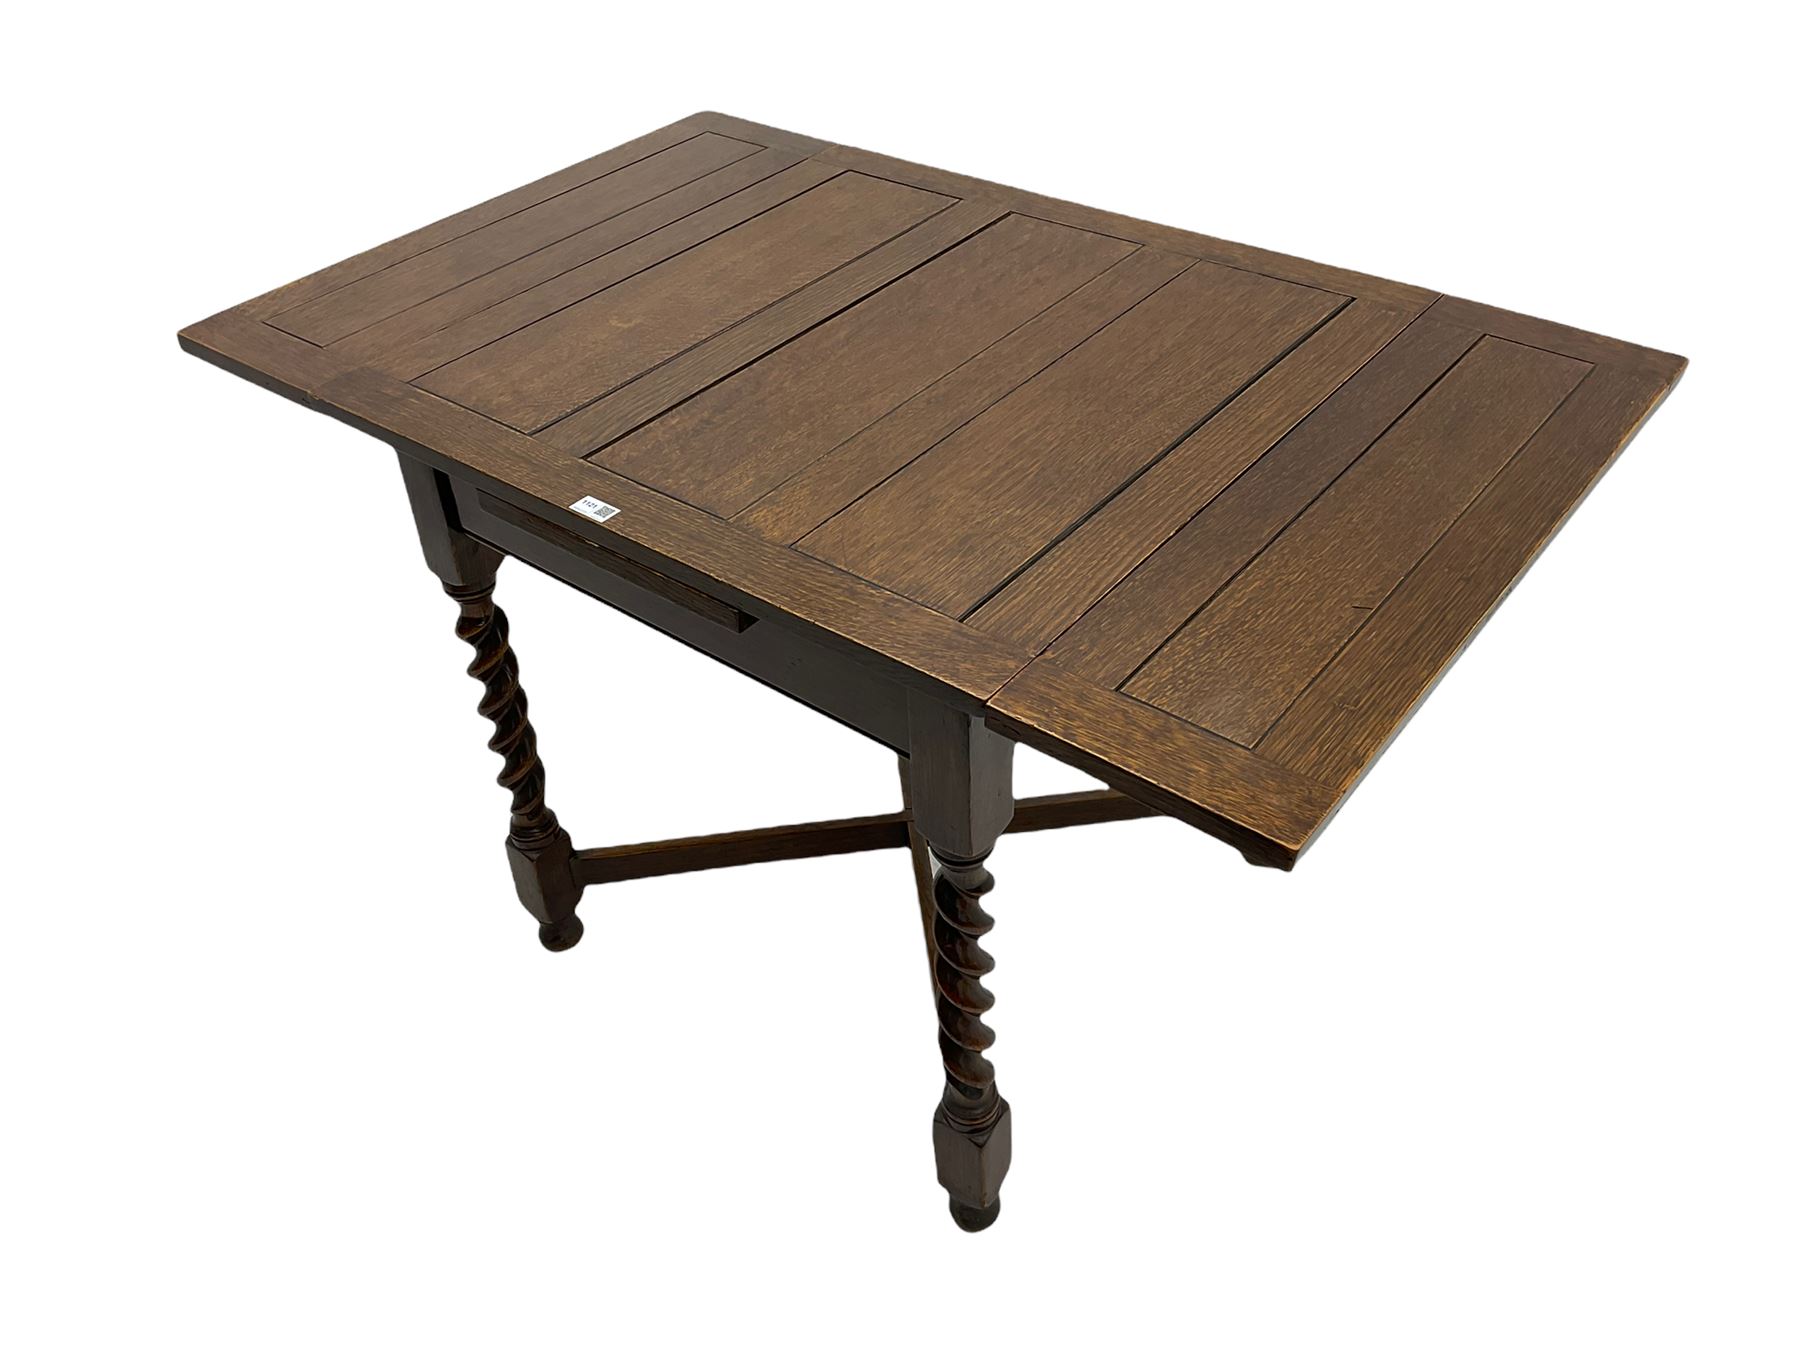 Early 20th century oak barley twist drawer leaf dining table - Image 6 of 10